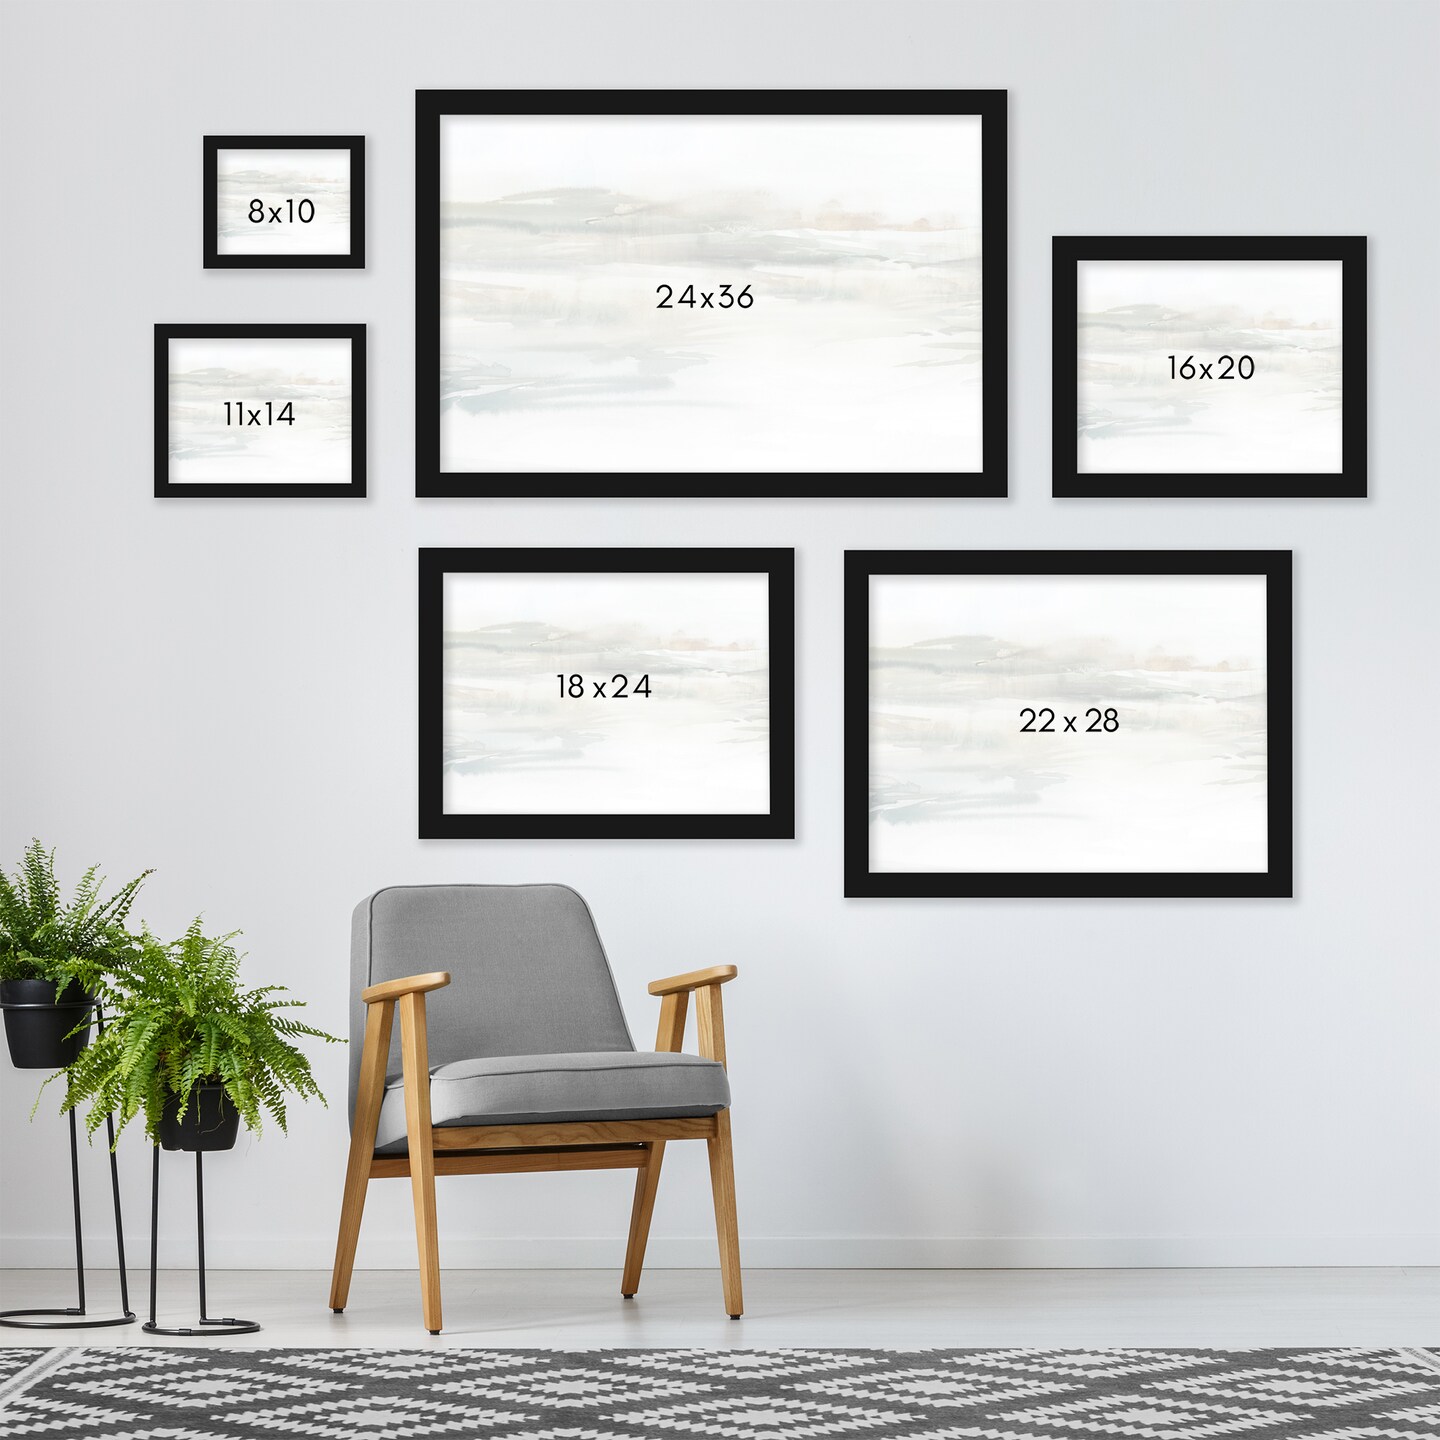 Only For A Moment by Pi Creative Art Frame  - Americanflat